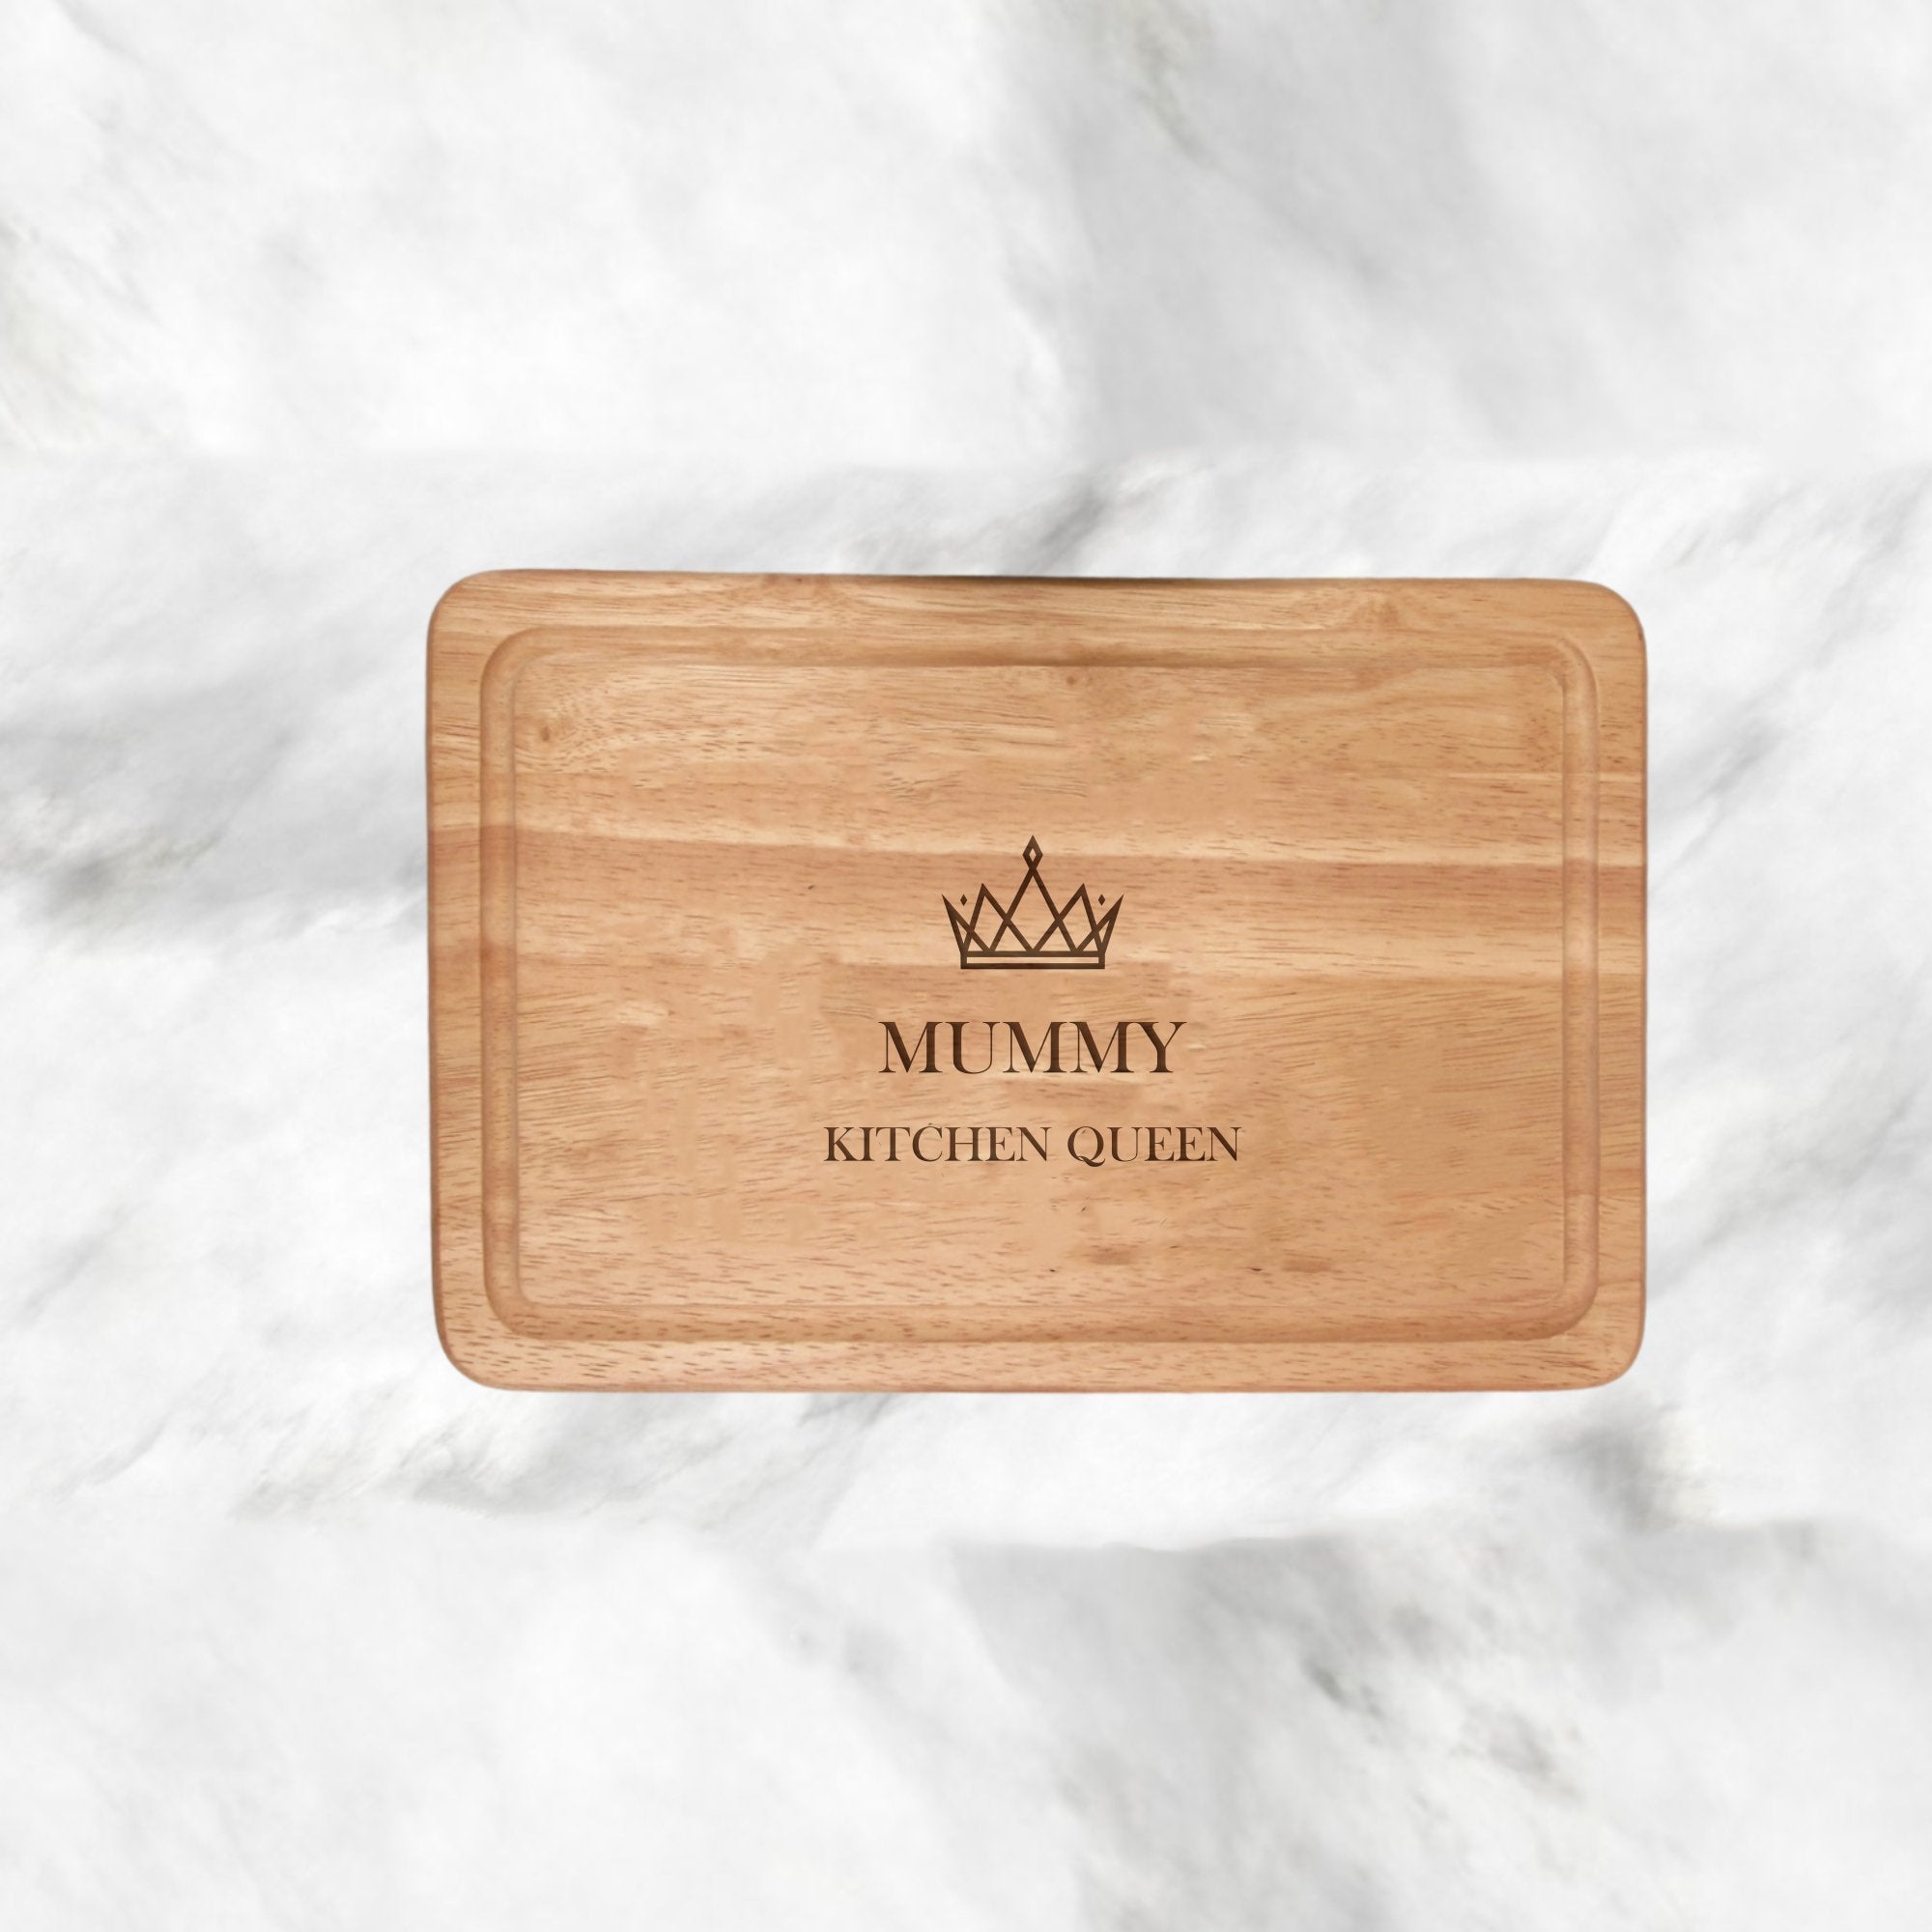 Personalised Chopping Board Queen Crown Design, 300x200mm: Make it yours with engraved text on two lines (max 20 characters each). Crafted from sturdy premium wood, this board is a thoughtful gift for housewarmings, weddings, or anniversaries.